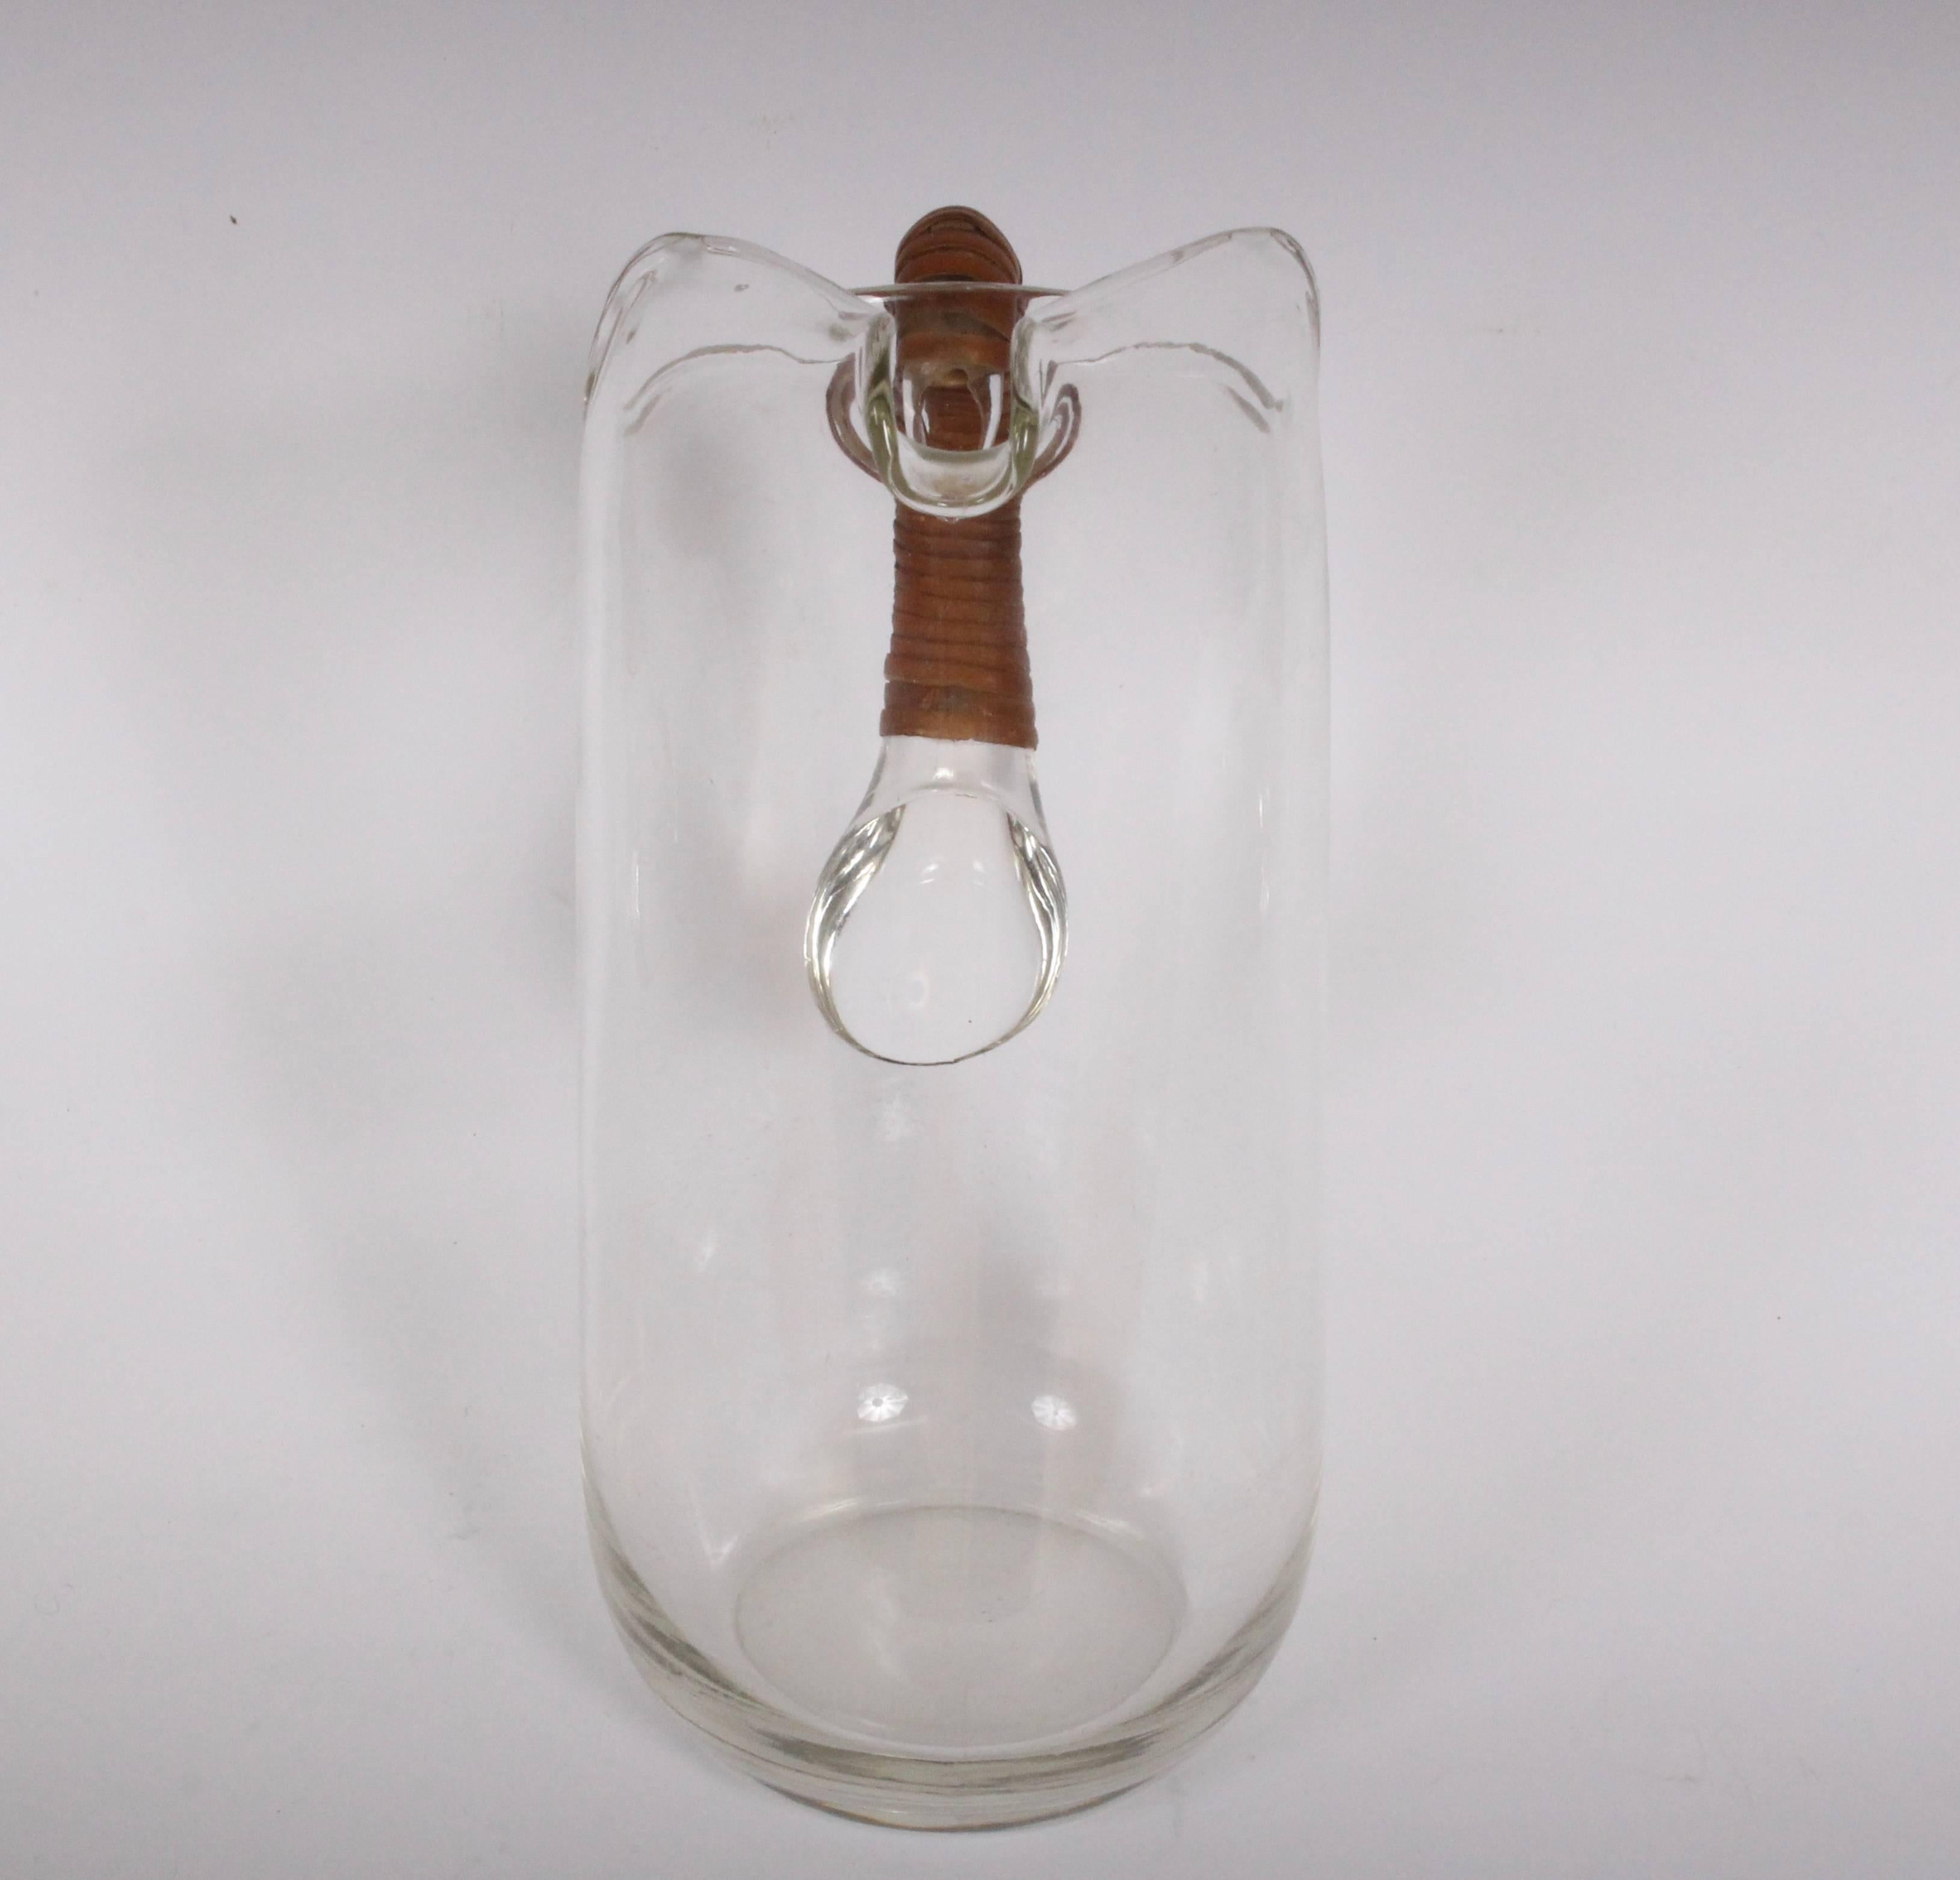 Modern Carl Auböck glass pitcher with caned wrapped handle, circa 1950s.
3